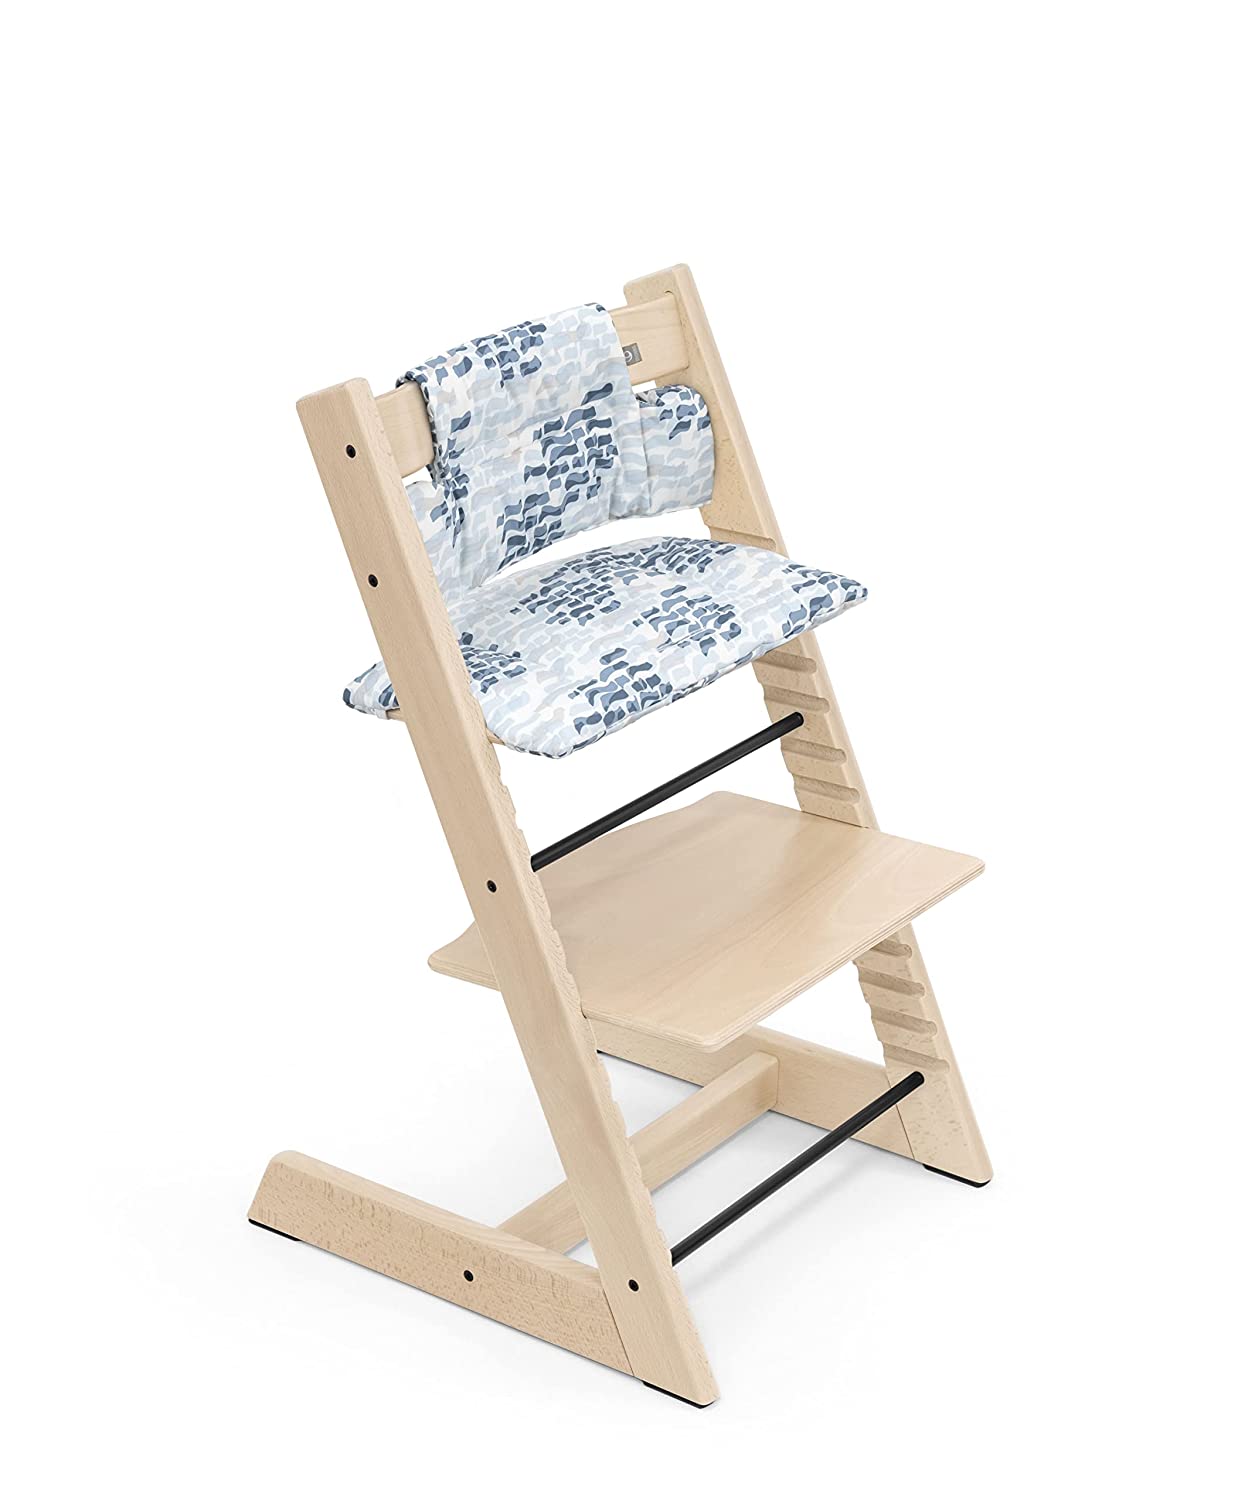 Stokke Tripp Trapp Classic Pillow - High Chair Cushion for Tripp Trapp - For Babies and Children - Waves Blue